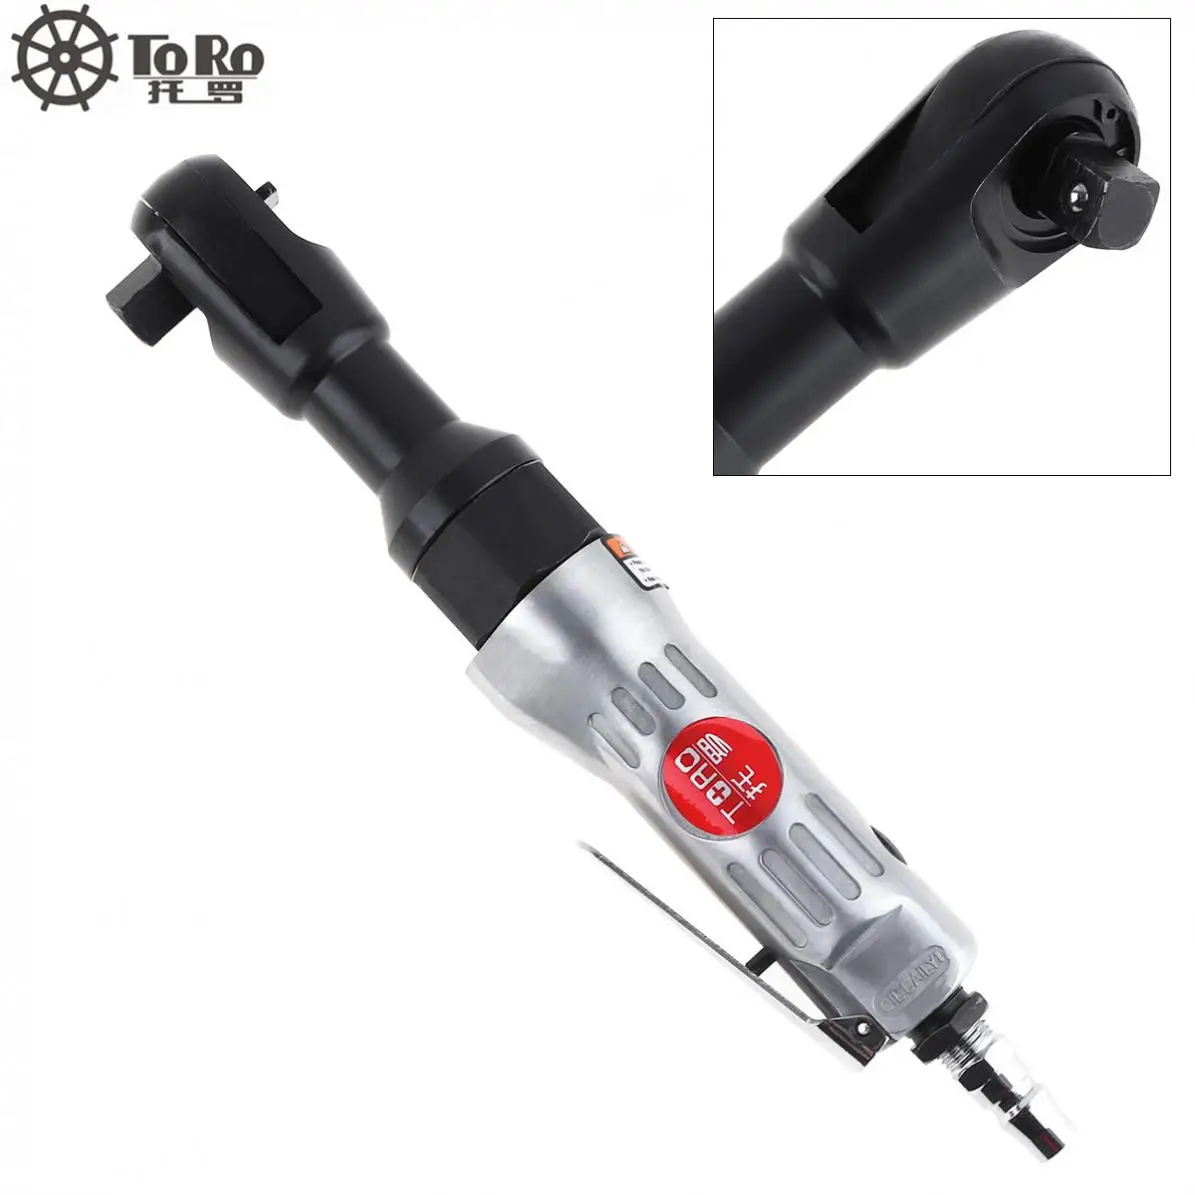 1/2'' Pneumatic Air Wrench Ratchet Wrench Pneumatic Tools with Air Inlet Interface Adjustable Switch for Car Repair Disassemble